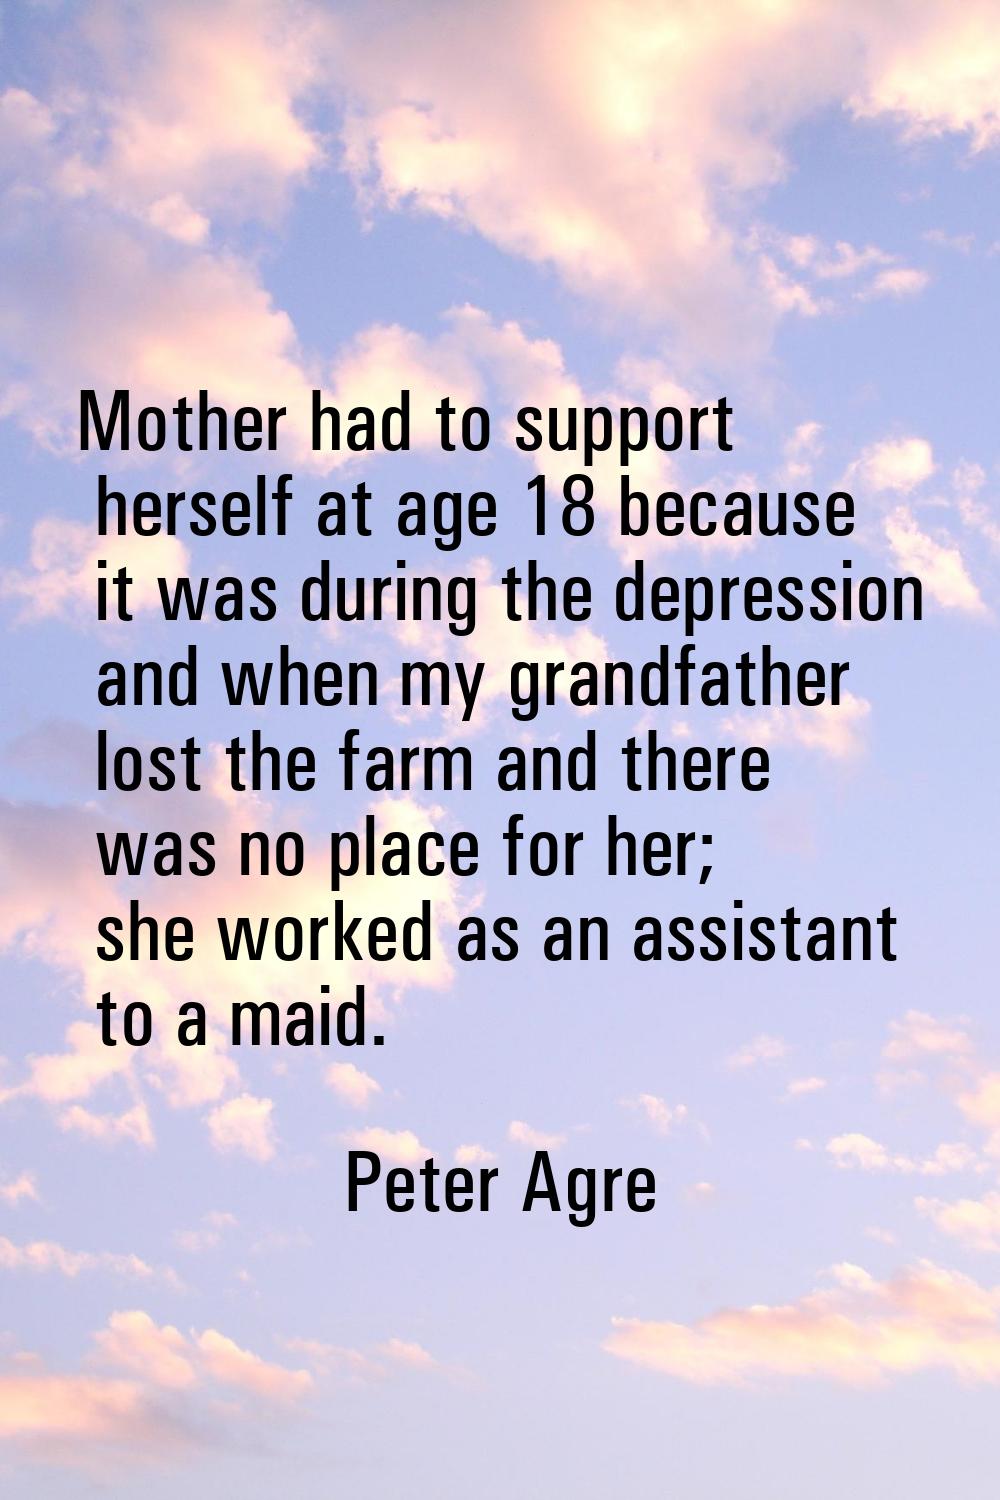 Mother had to support herself at age 18 because it was during the depression and when my grandfathe